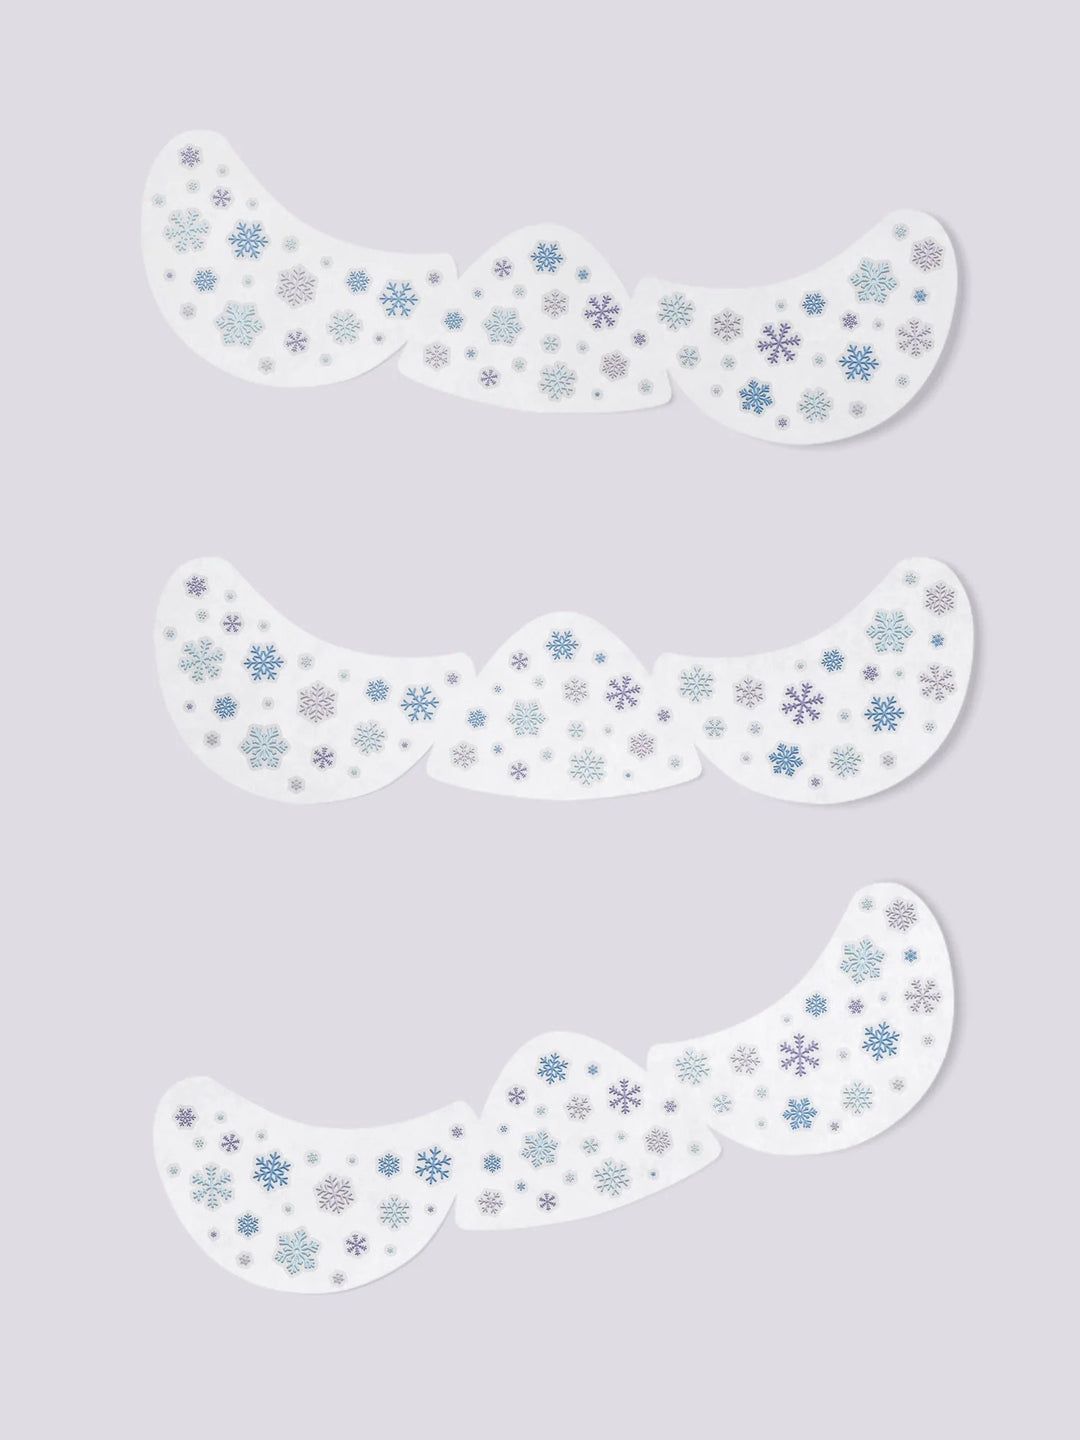 NEW Ducky Street Freckles Temporary Tattoos - Snowflakes - #HolaNanu#NDIS #creativekids